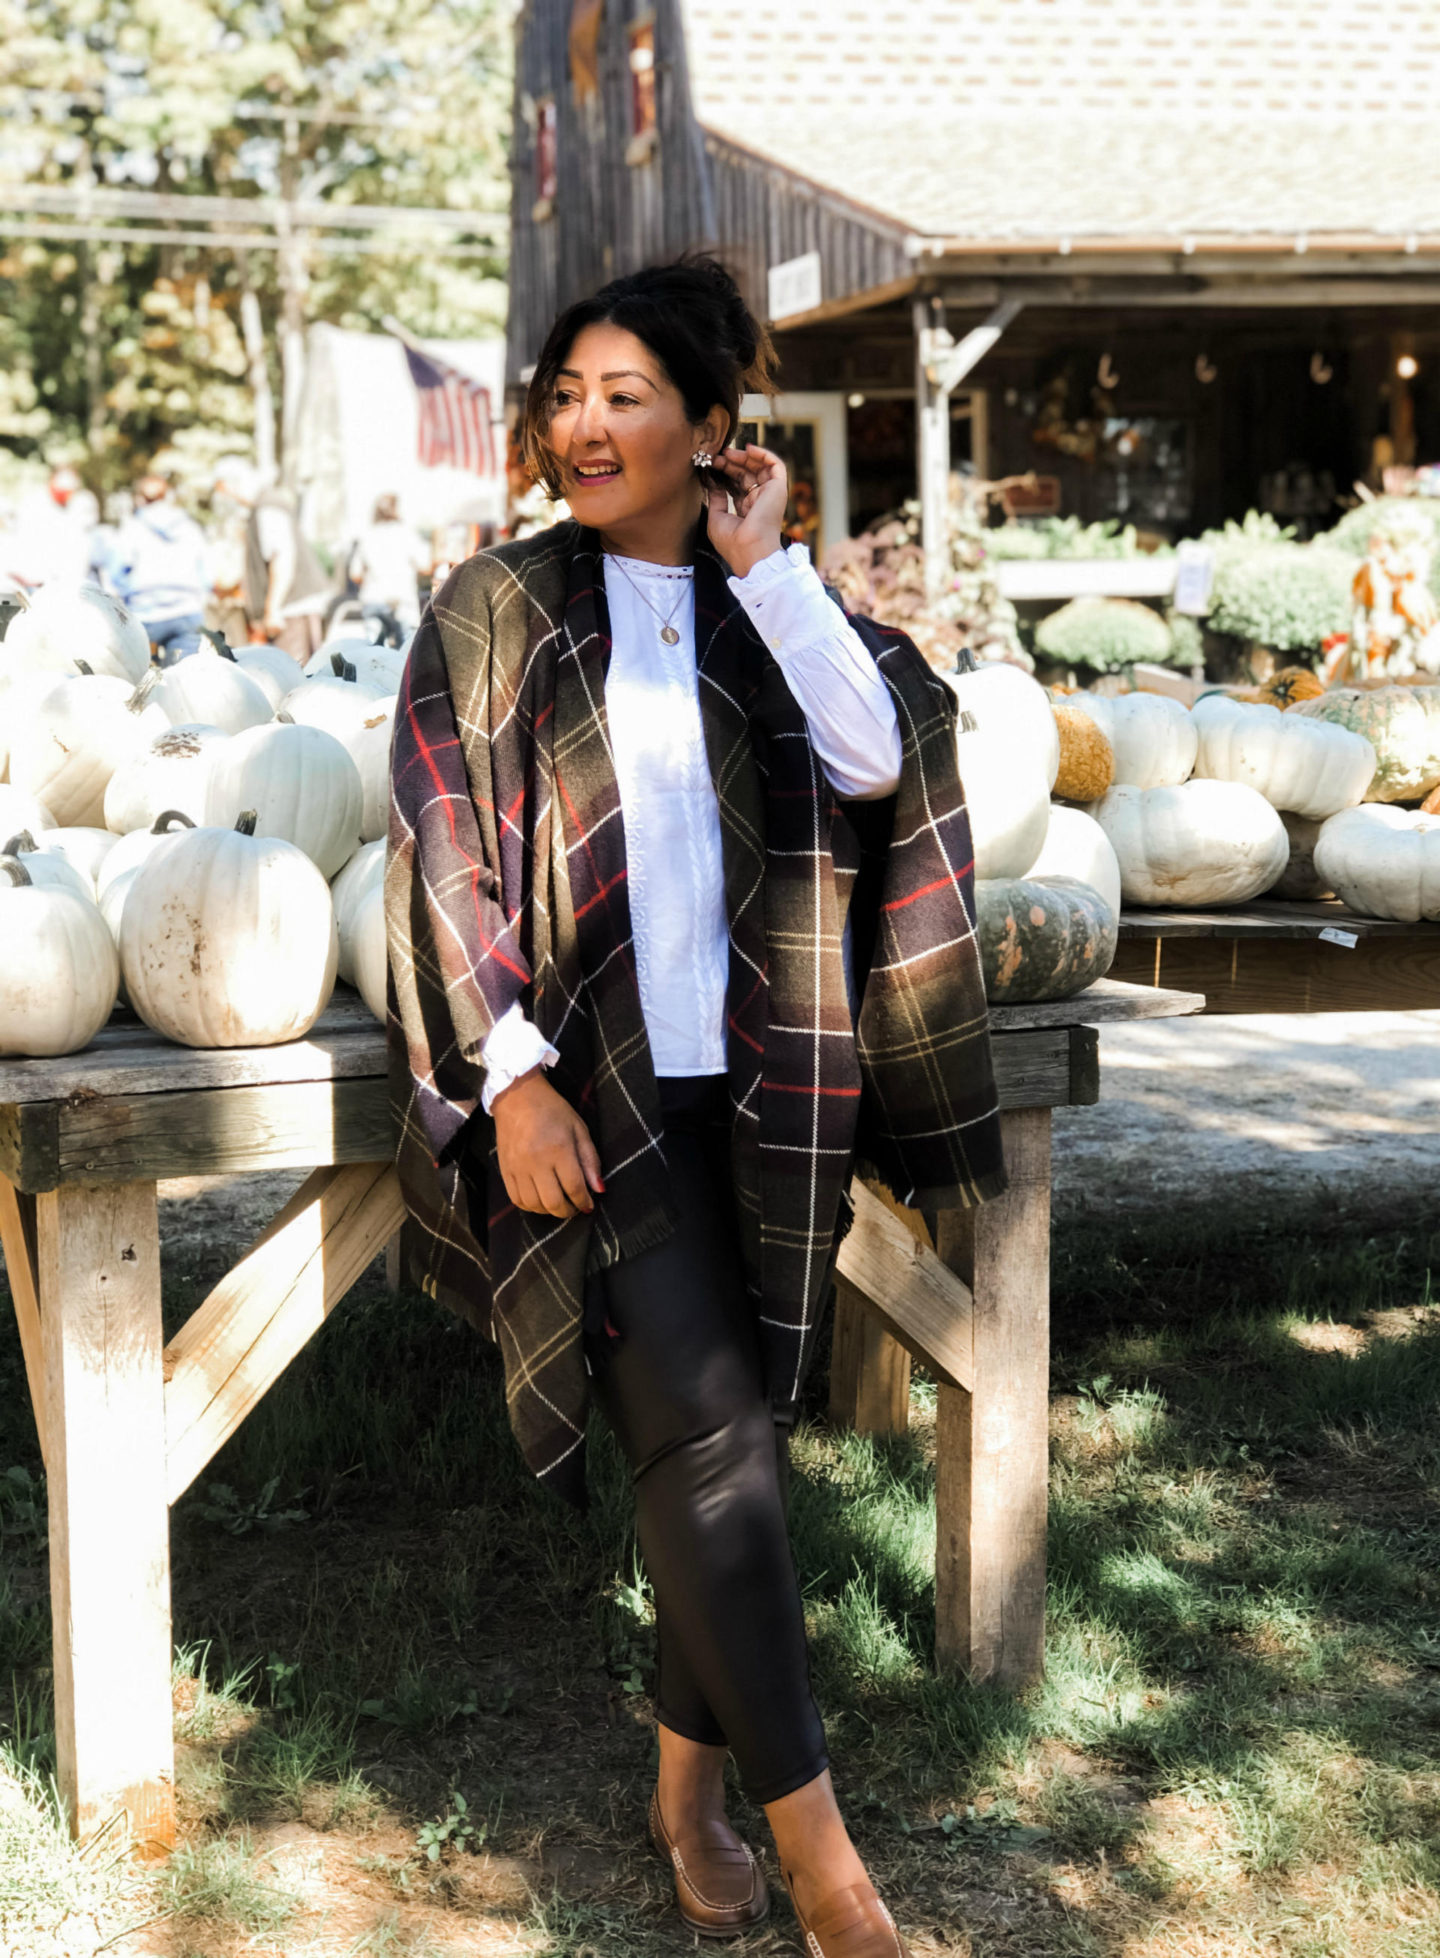 Chic Black Faux Leather Leggings For Fall